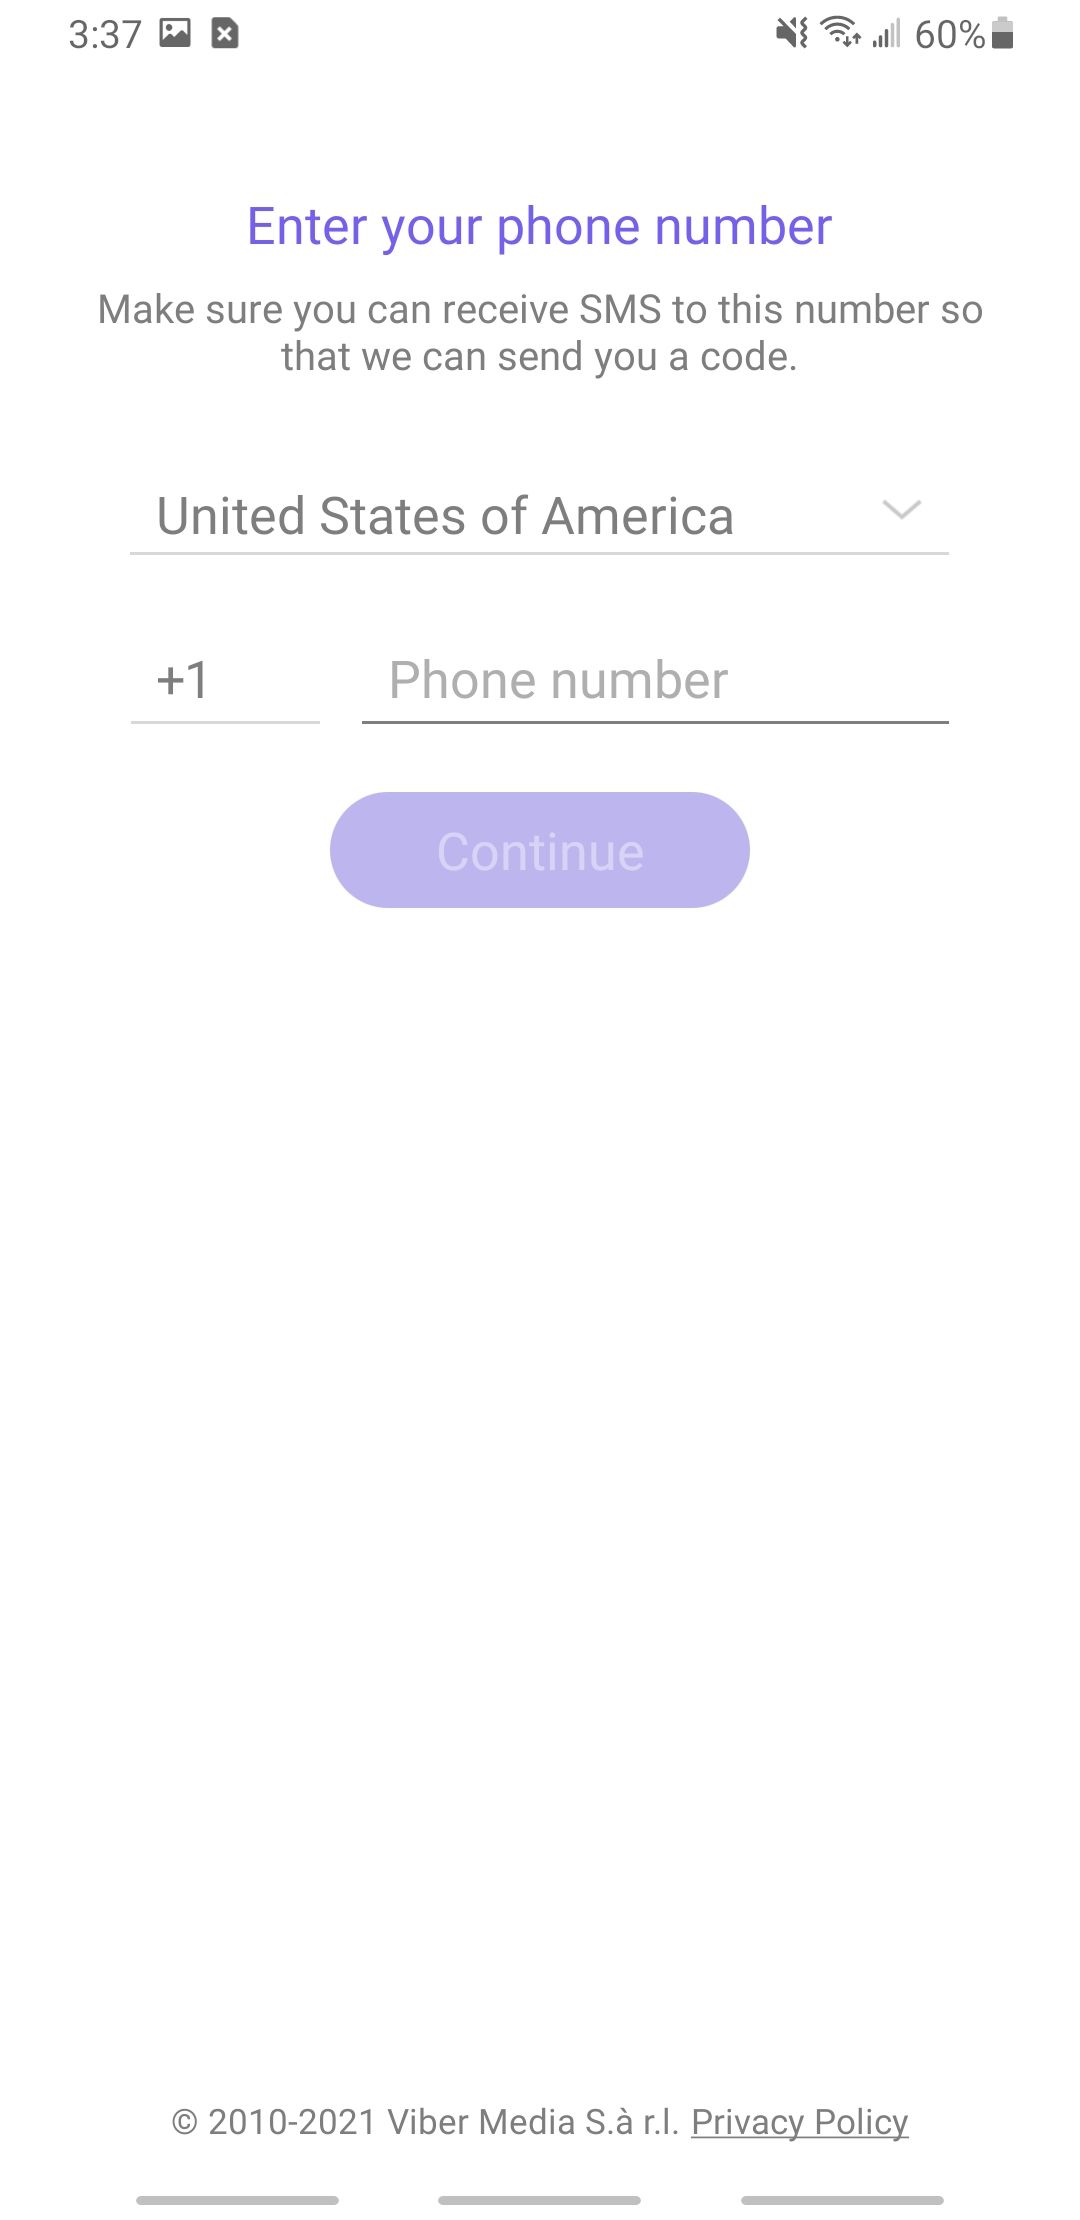 viber app connect a phone number screen